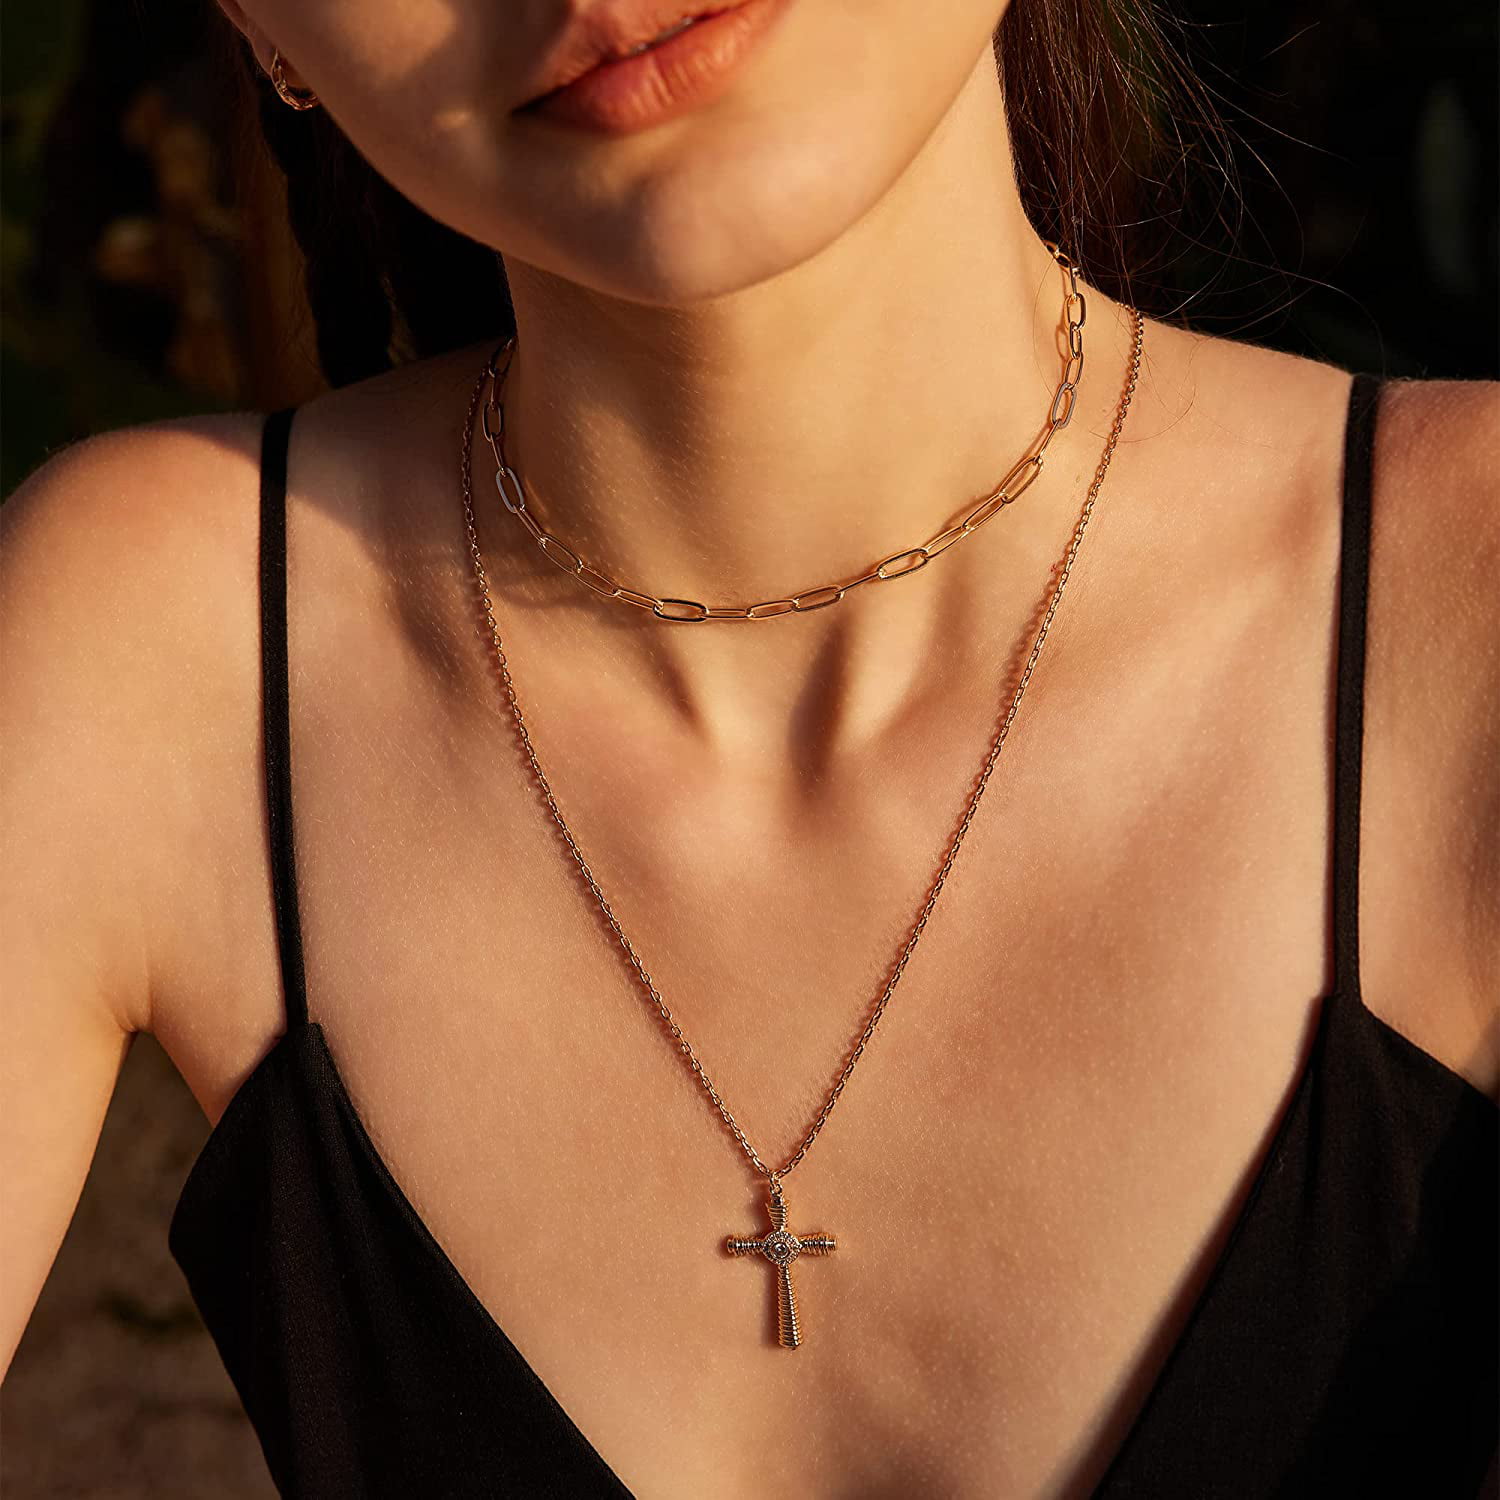 Qwzndzgr Gold Cross Necklace for Women 14K Gold Plated Chain Necklace Dainty Gold Cross Pendant Necklace Simple Cute Necklaces for Girls Christian